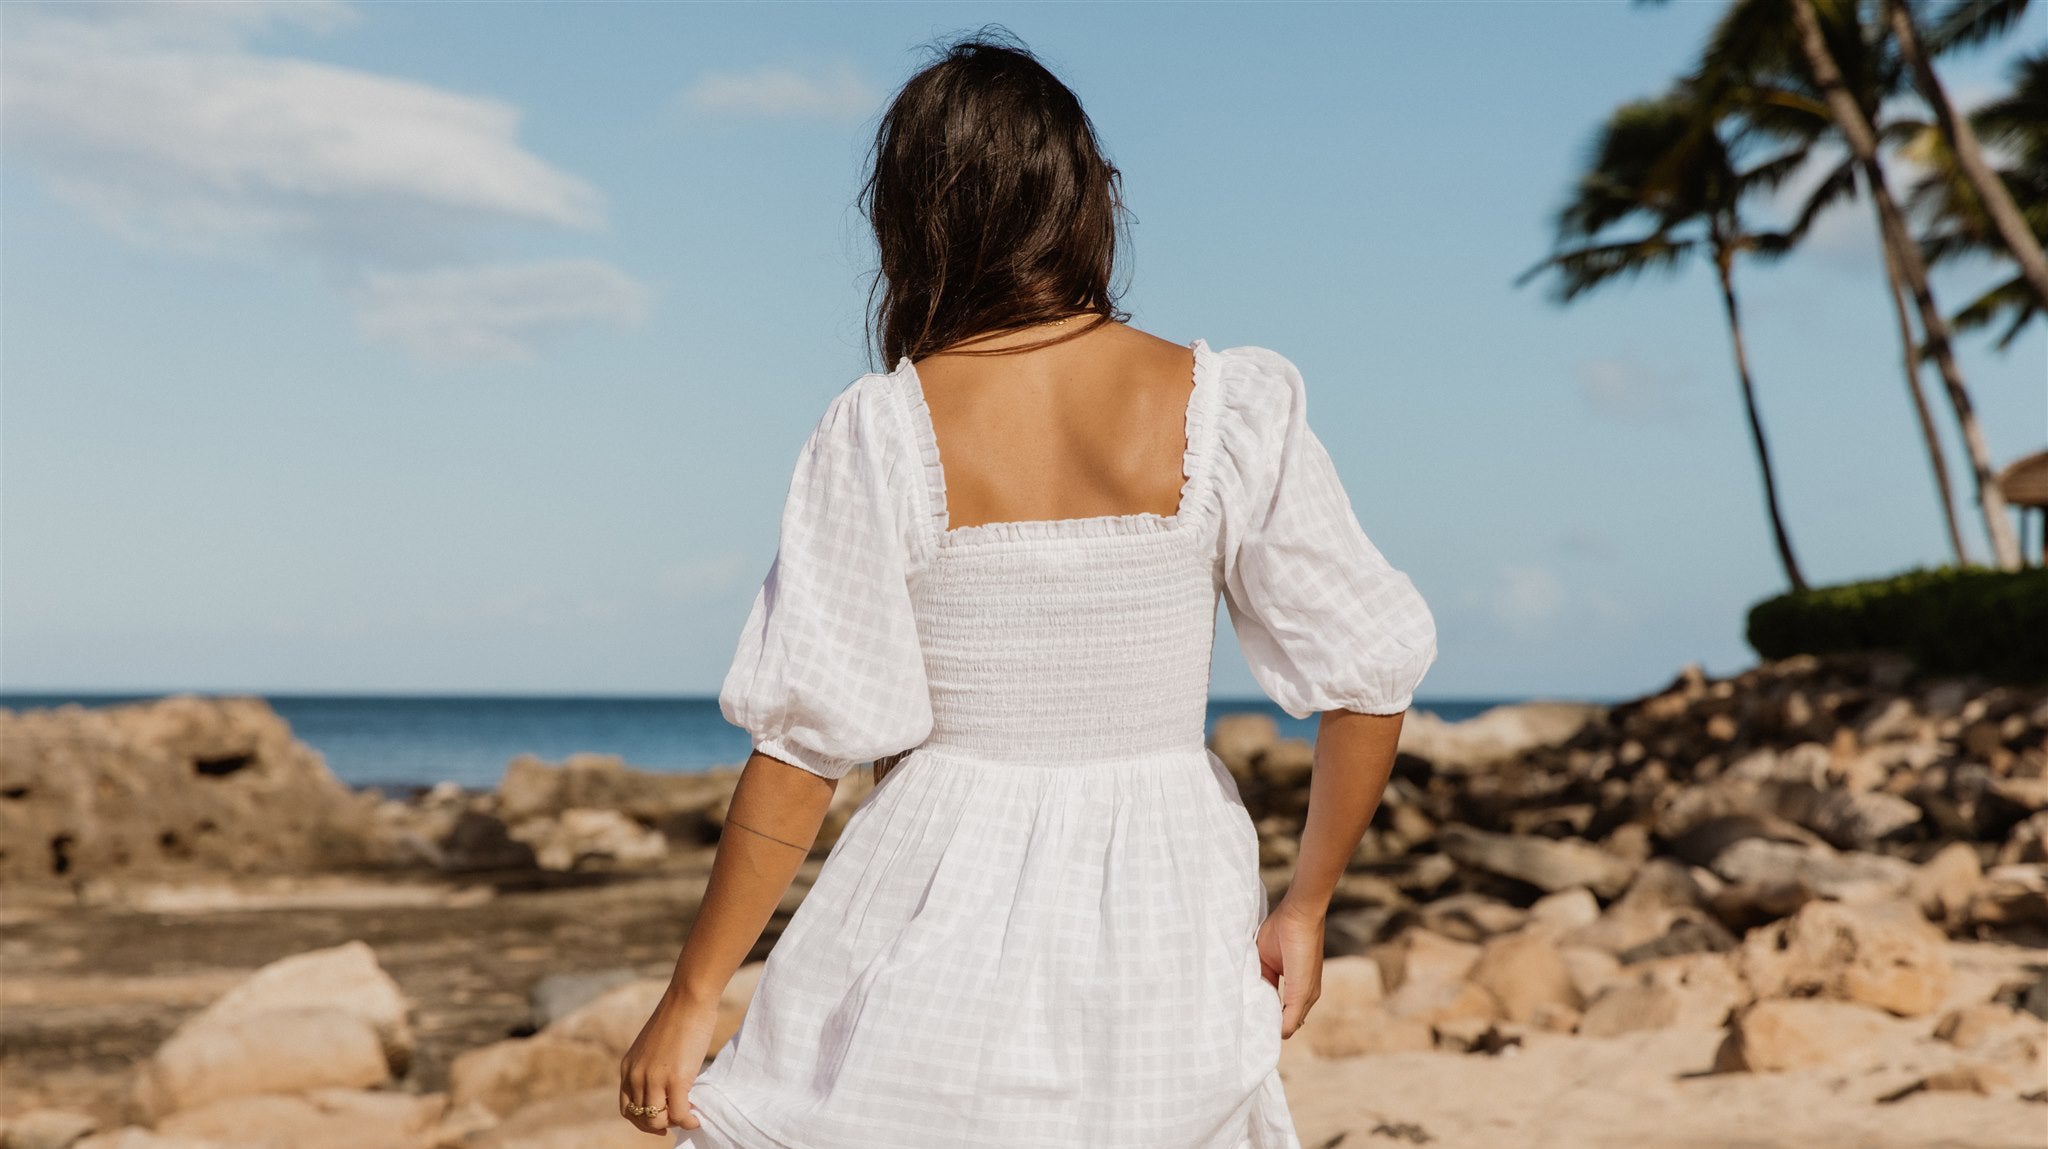 south pacific island for your destination wedding, shop the wedding dress edit for weddings abroad in affordable dresses - Koy resort